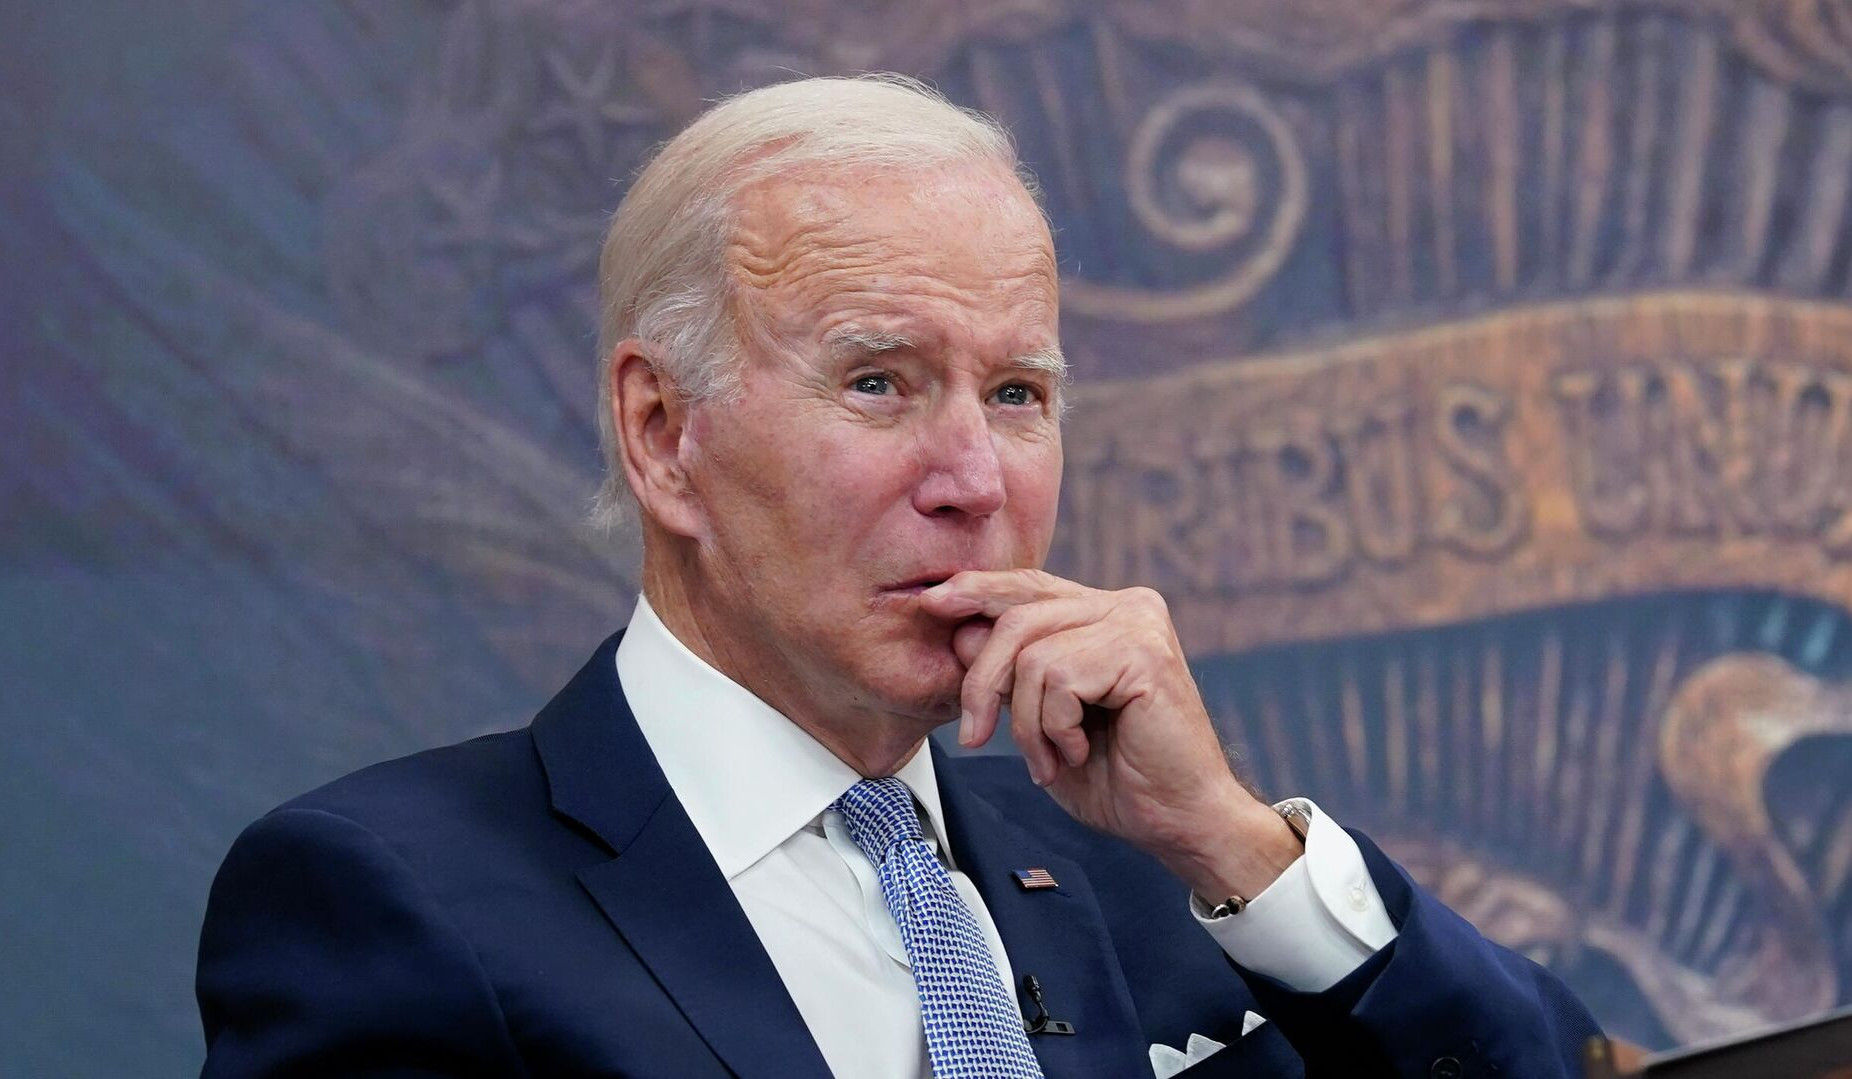 Arab countries are ready to fully recognize Israel in a future deal: Biden